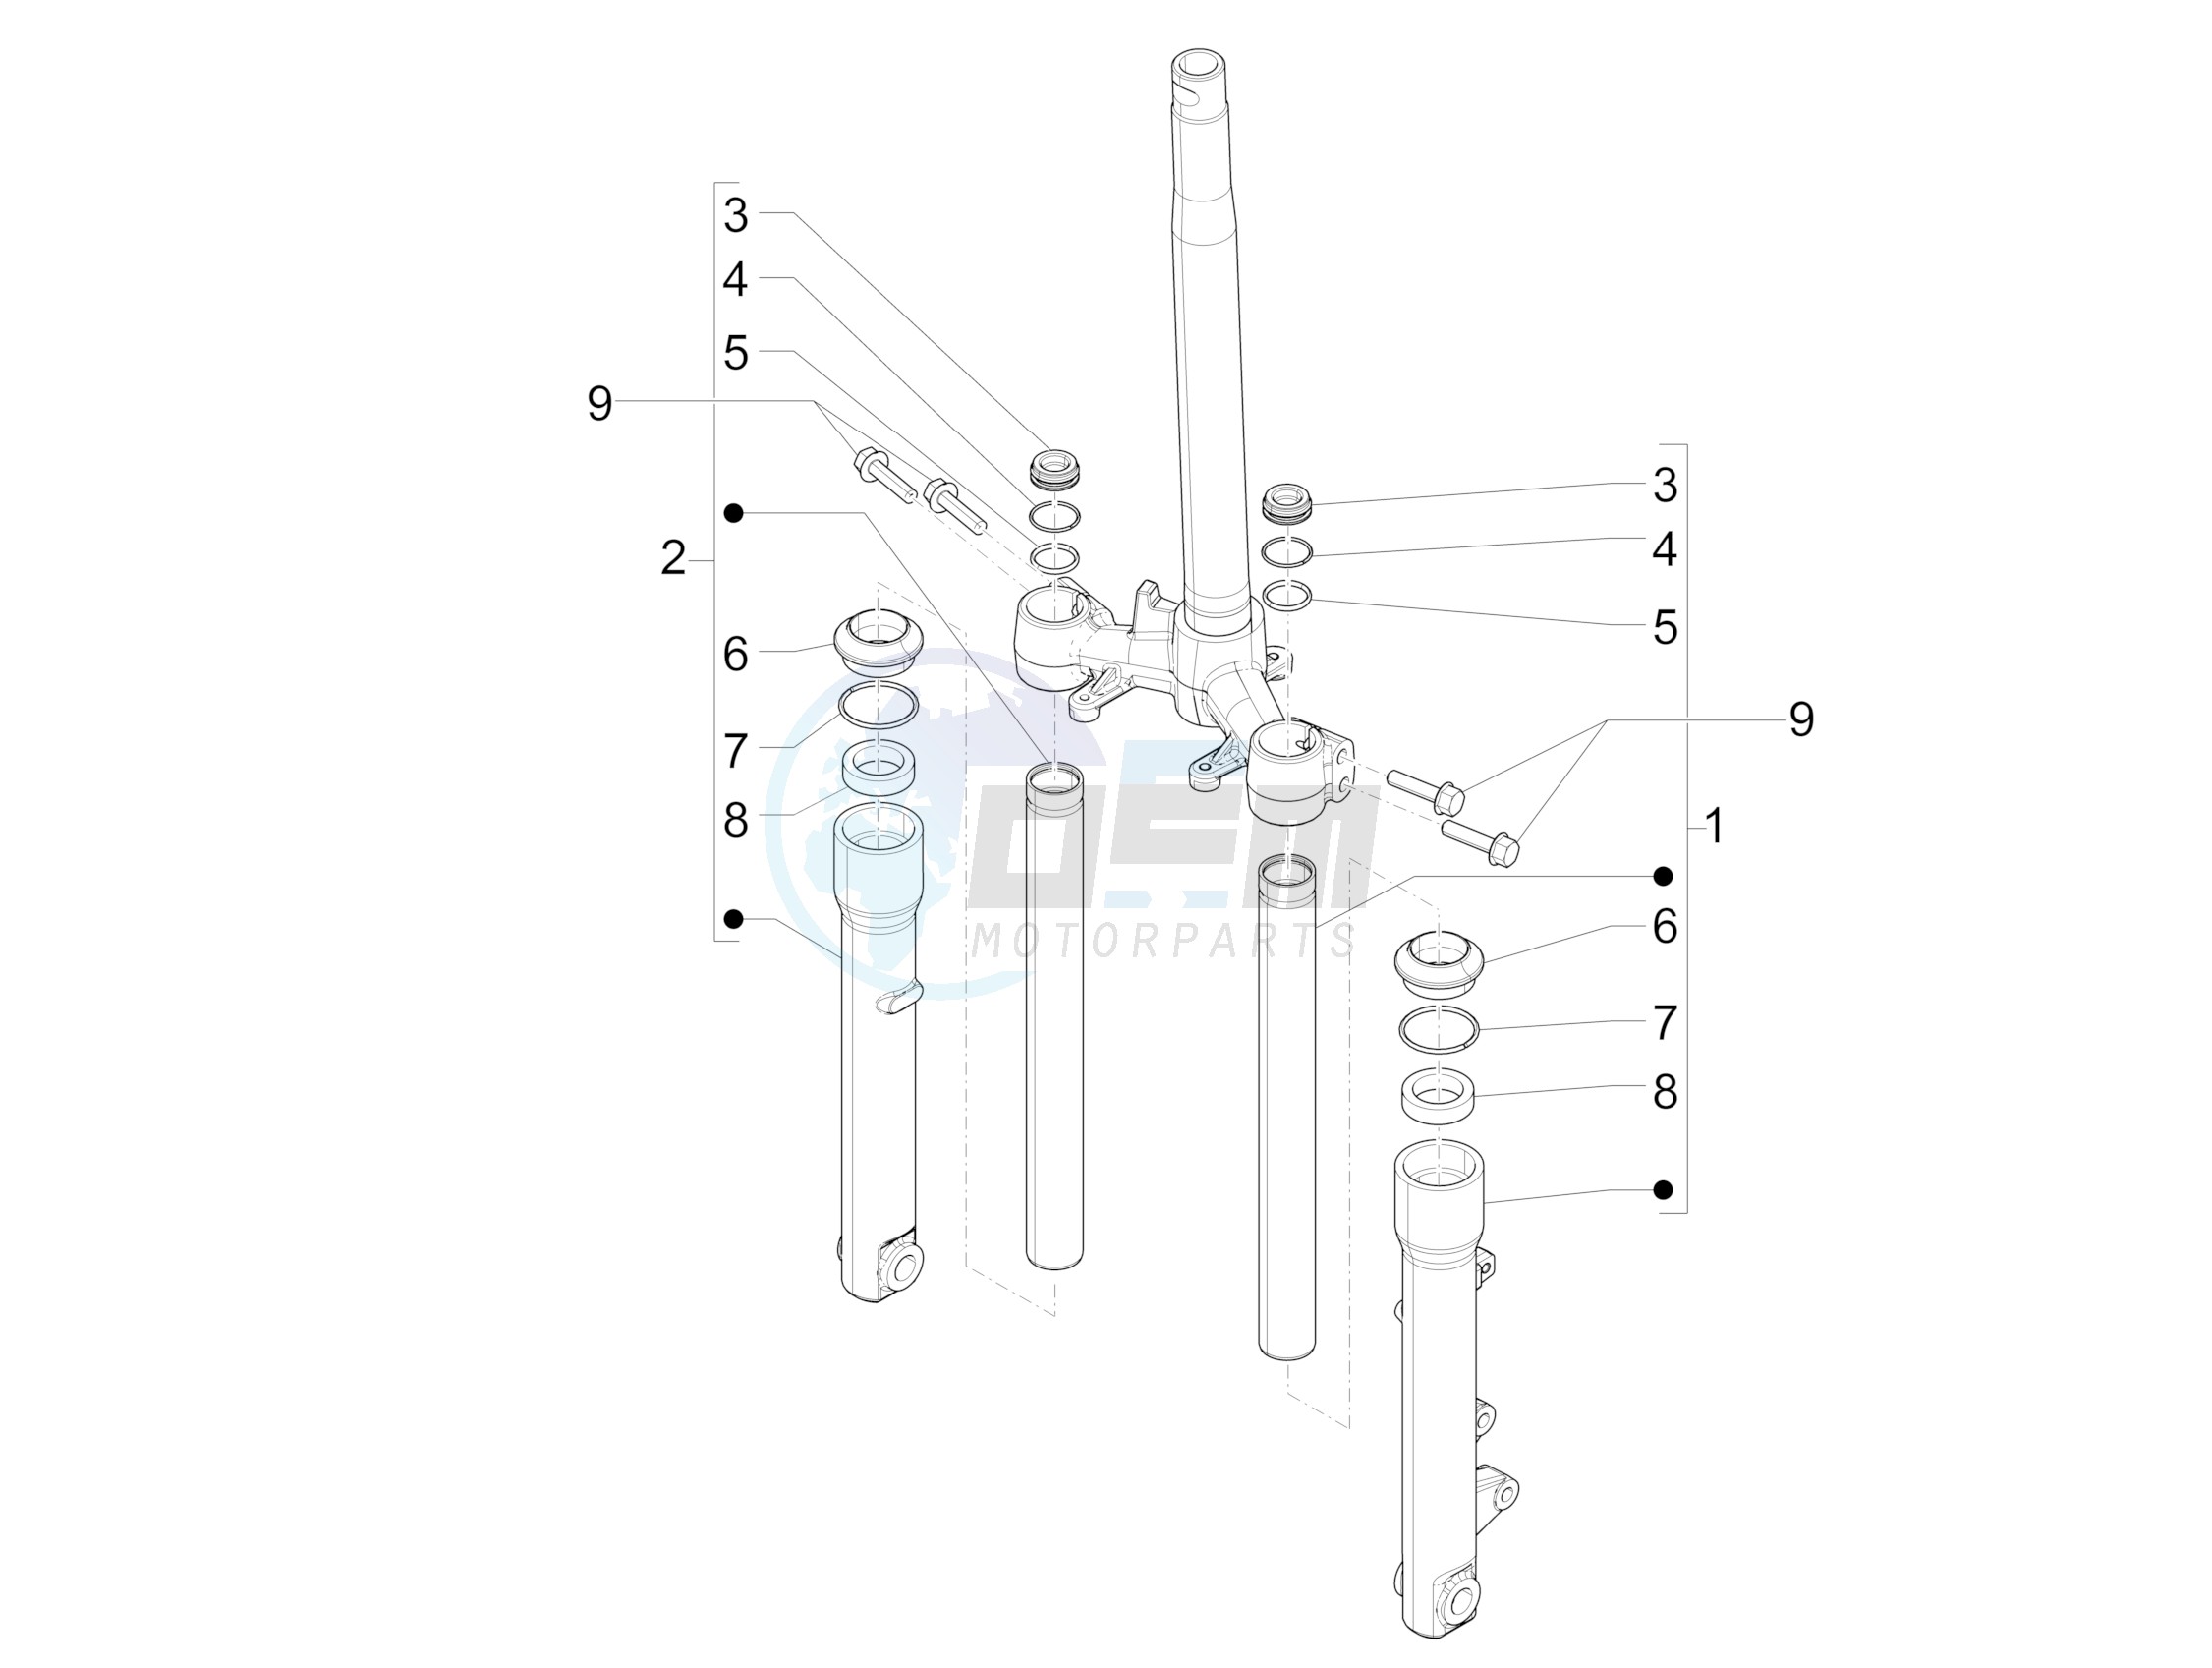 Fork's components (Wuxi Top) image